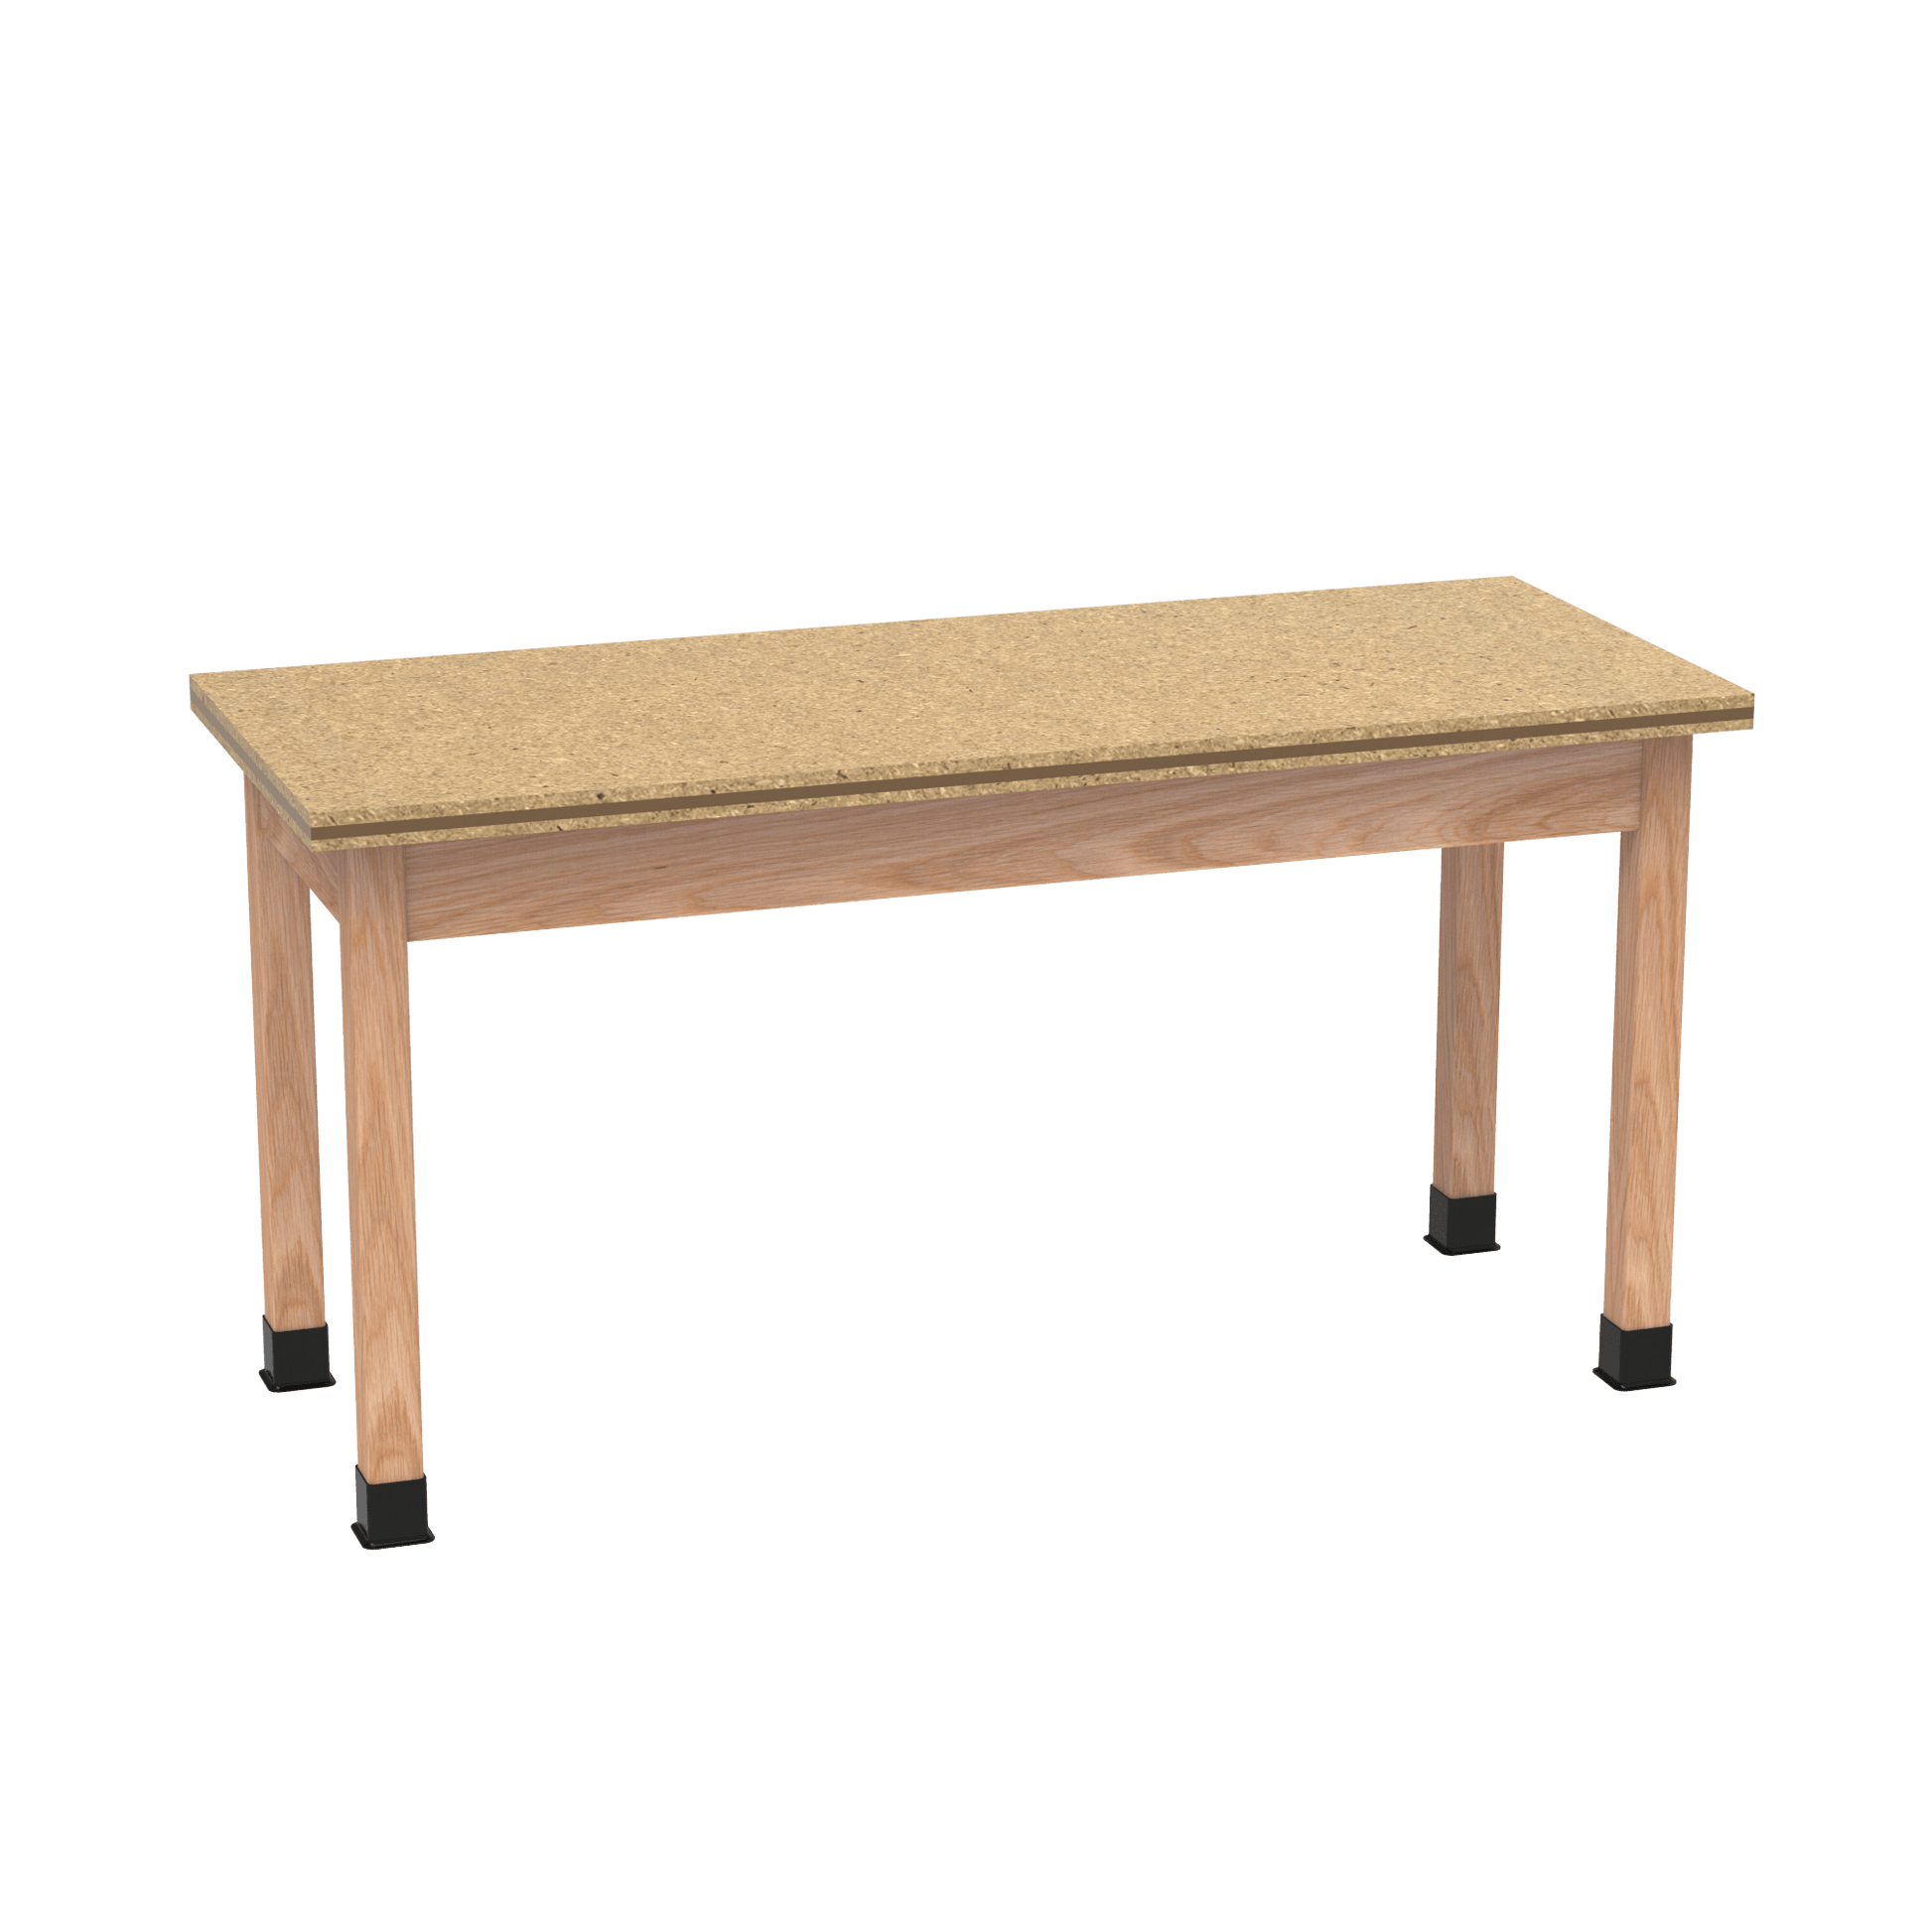 Diversified Woodcrafts Science Table - Plain Apron - 60" W x 24" D - Solid Wood Frame and Adjustable Glides - SchoolOutlet